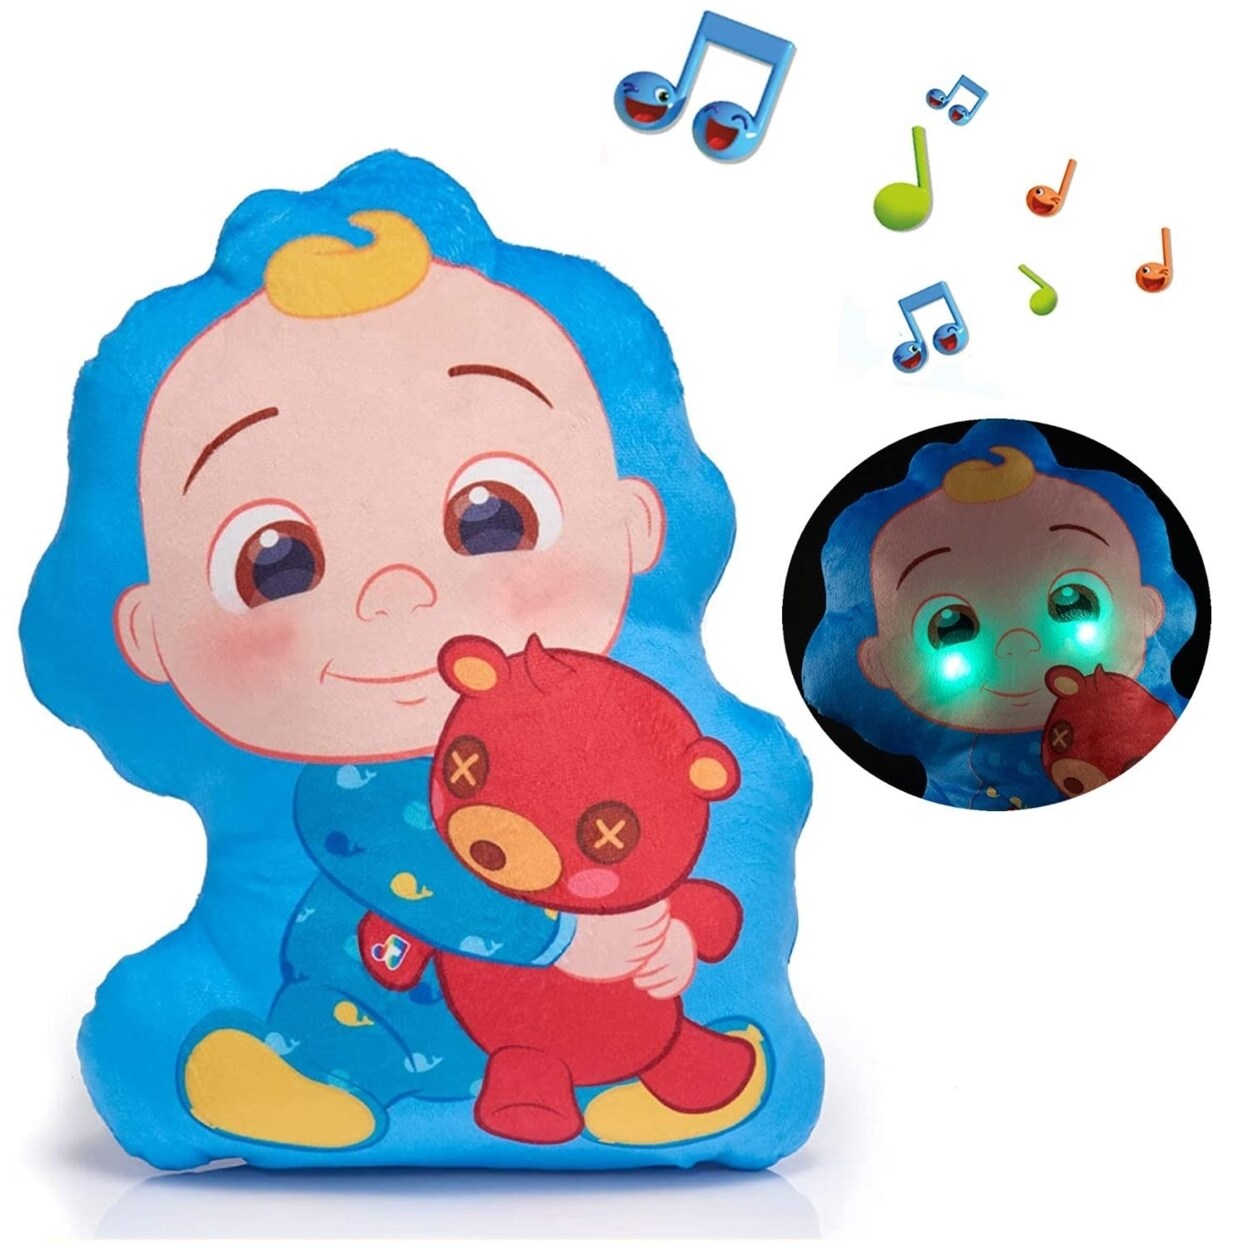 WOW! Stuff CoComelon JJs Musical Sleep Soother Bedtime Night Light Lullaby Pillow